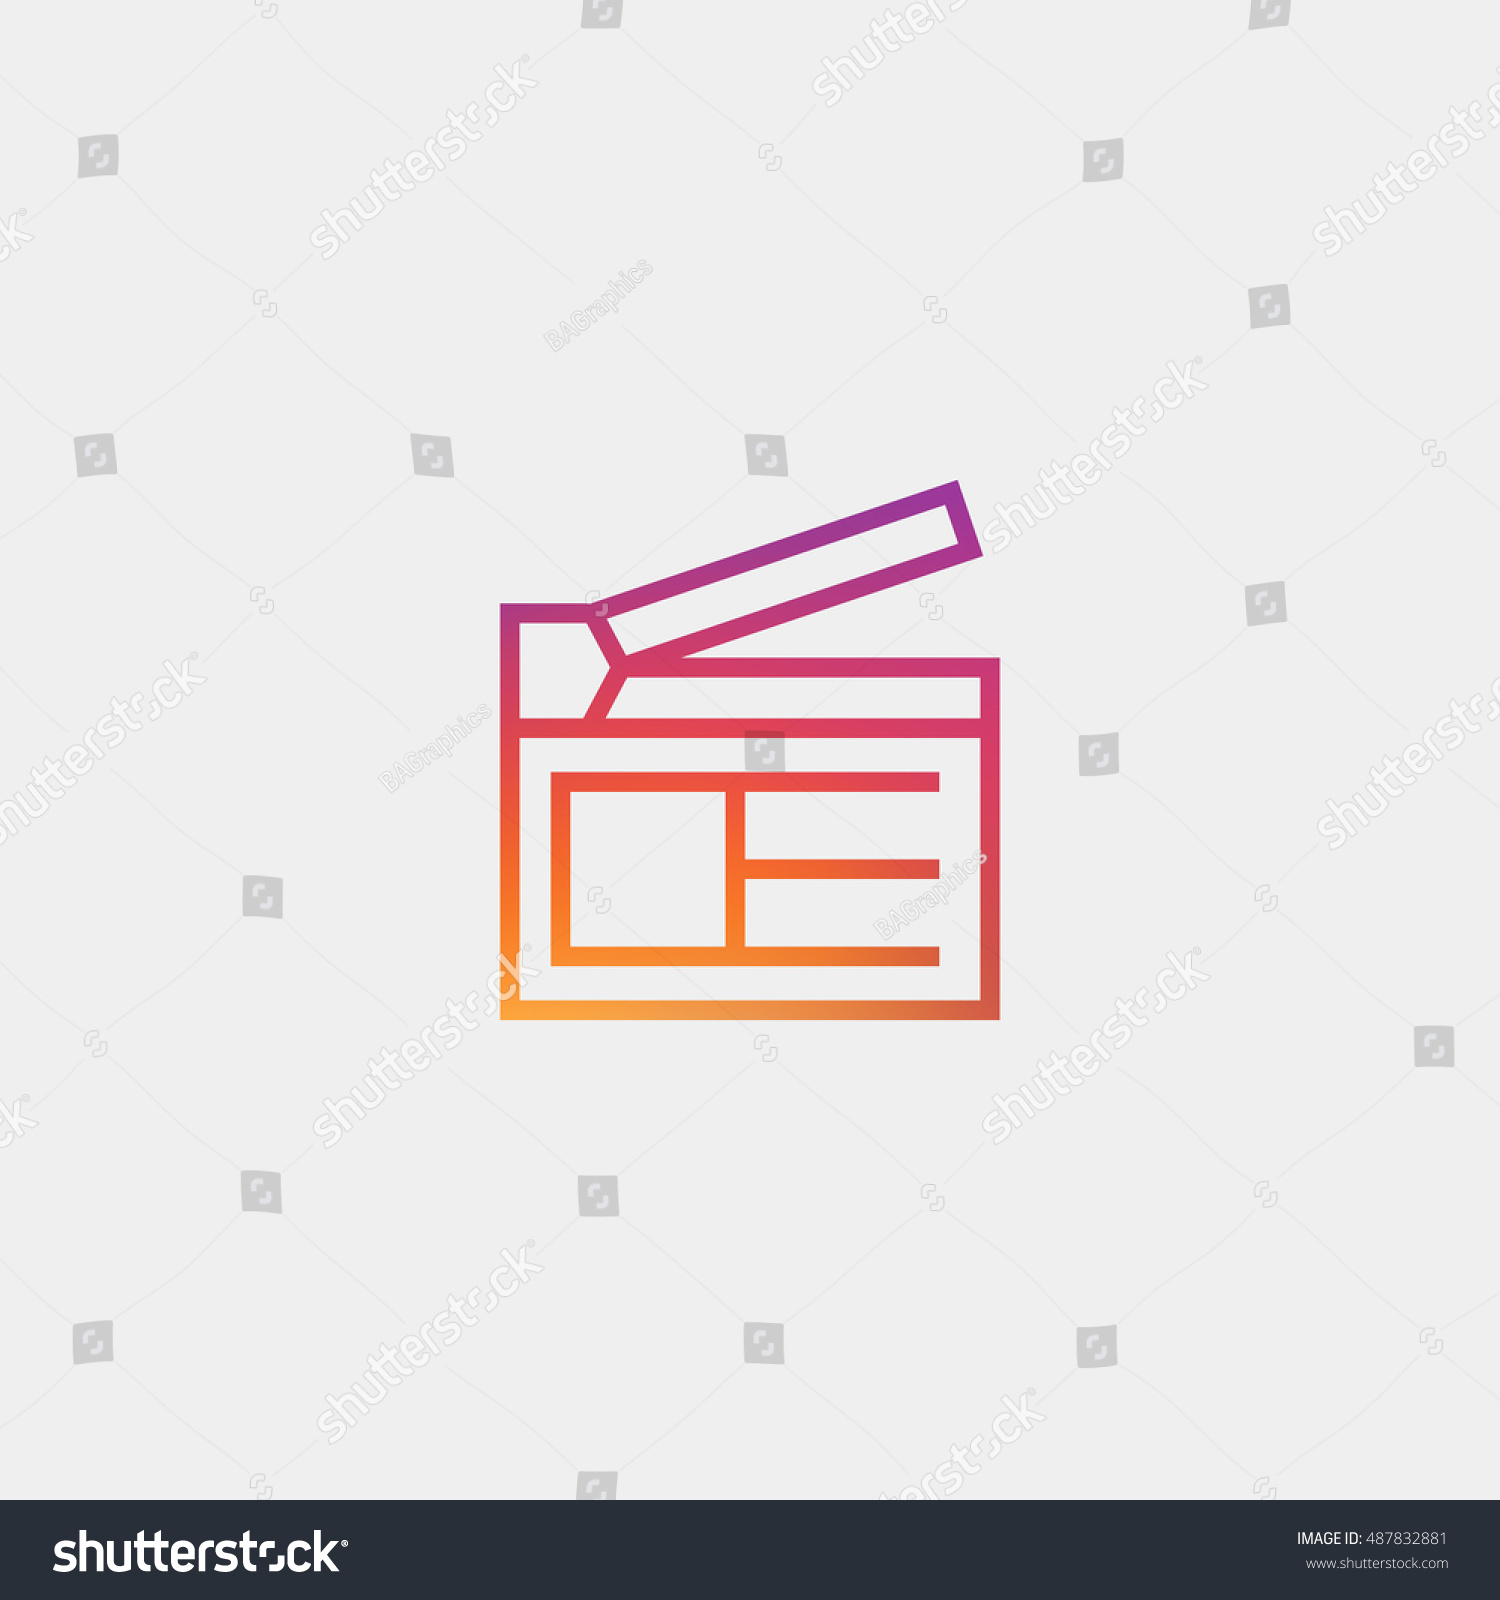 SVG of Clapperboard icon vector, clip art. Also useful as logo, web UI element, symbol, graphic image, silhouette and illustration. Compatible with ai, cdr, jpg, png, svg, pdf, ico and eps. svg